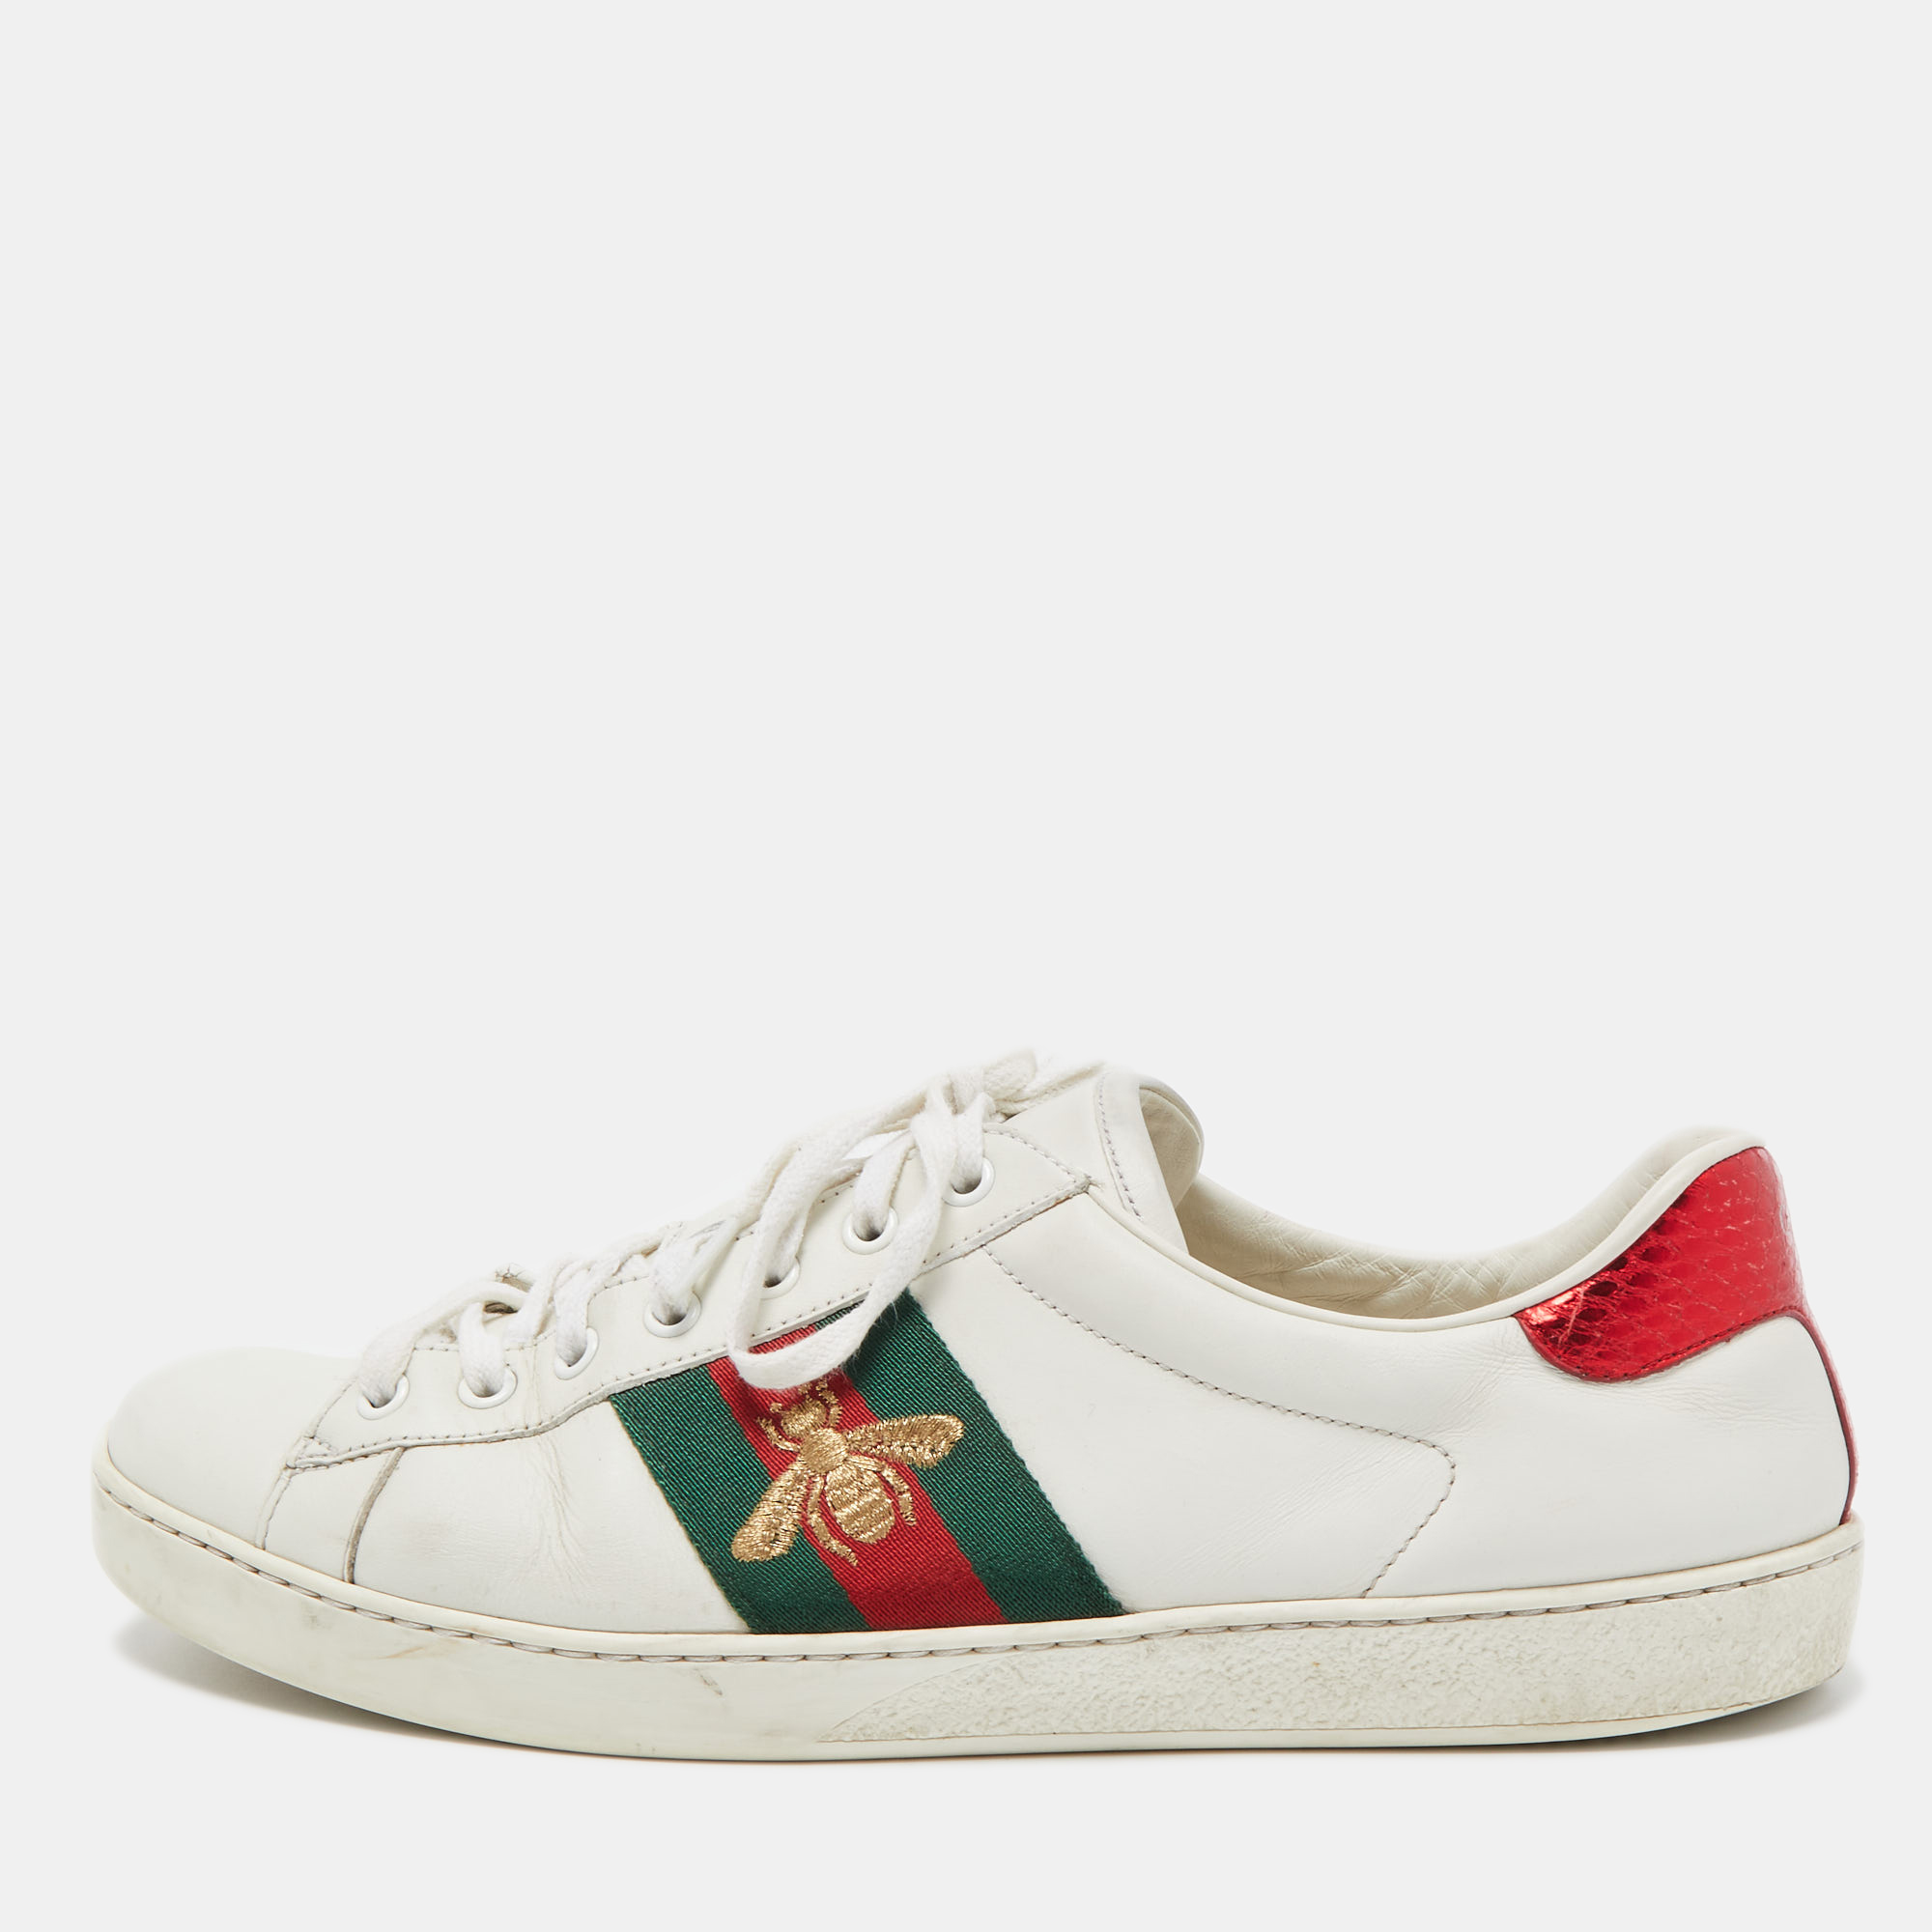 Pre-owned Gucci White Leather Embroidered Bee Ace Sneakers Size 43